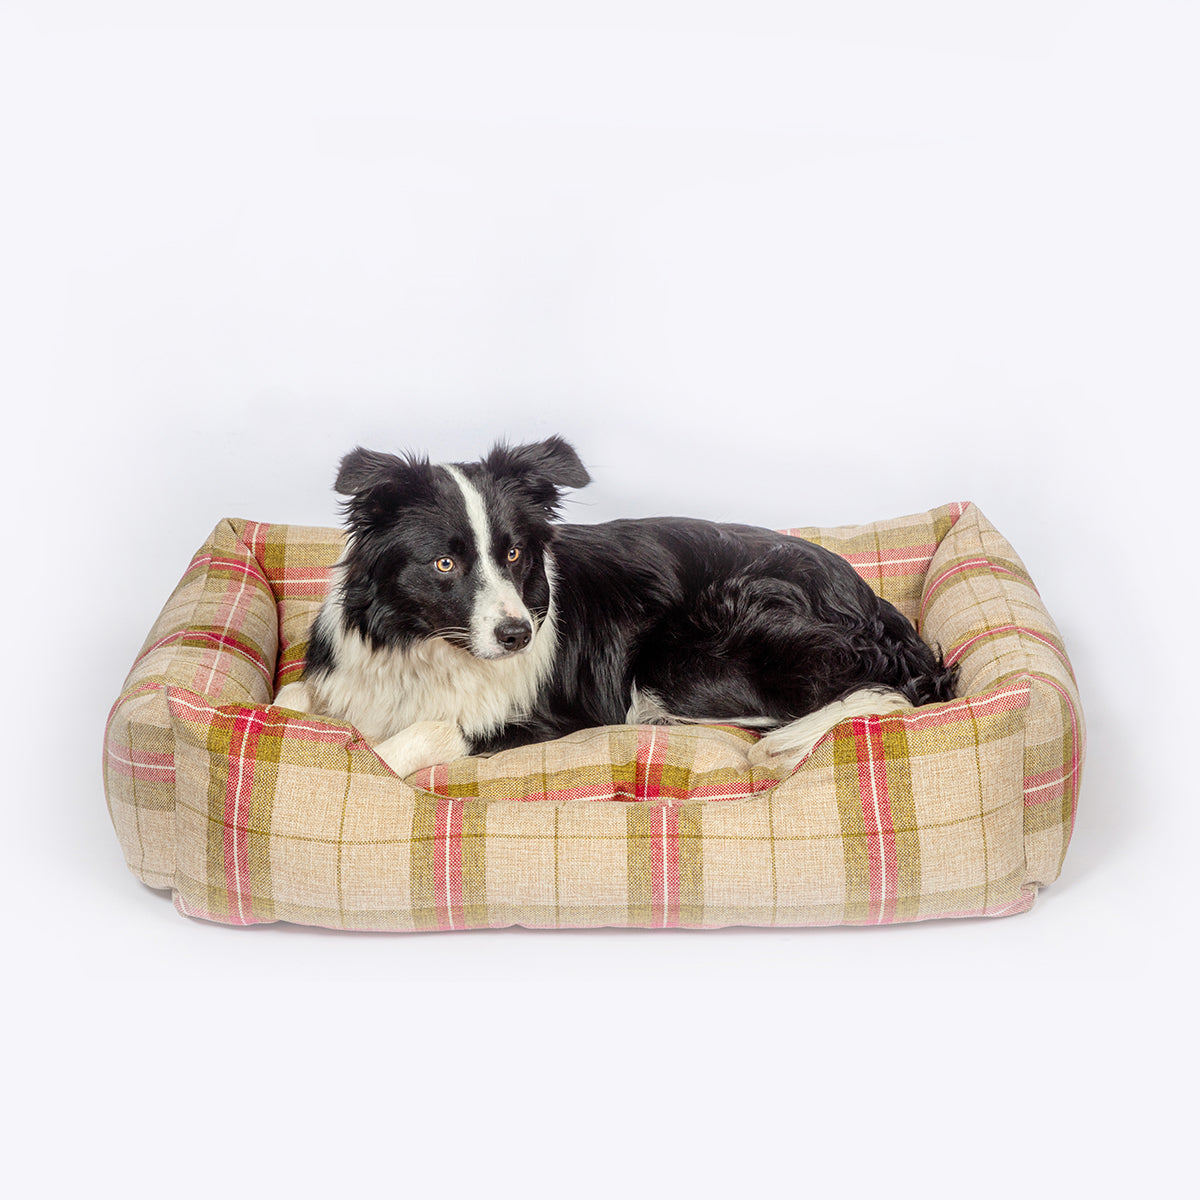 Image of Danish Design Newton Moss Snuggle Dog Bed - Brown/Red - Medium 23 inches